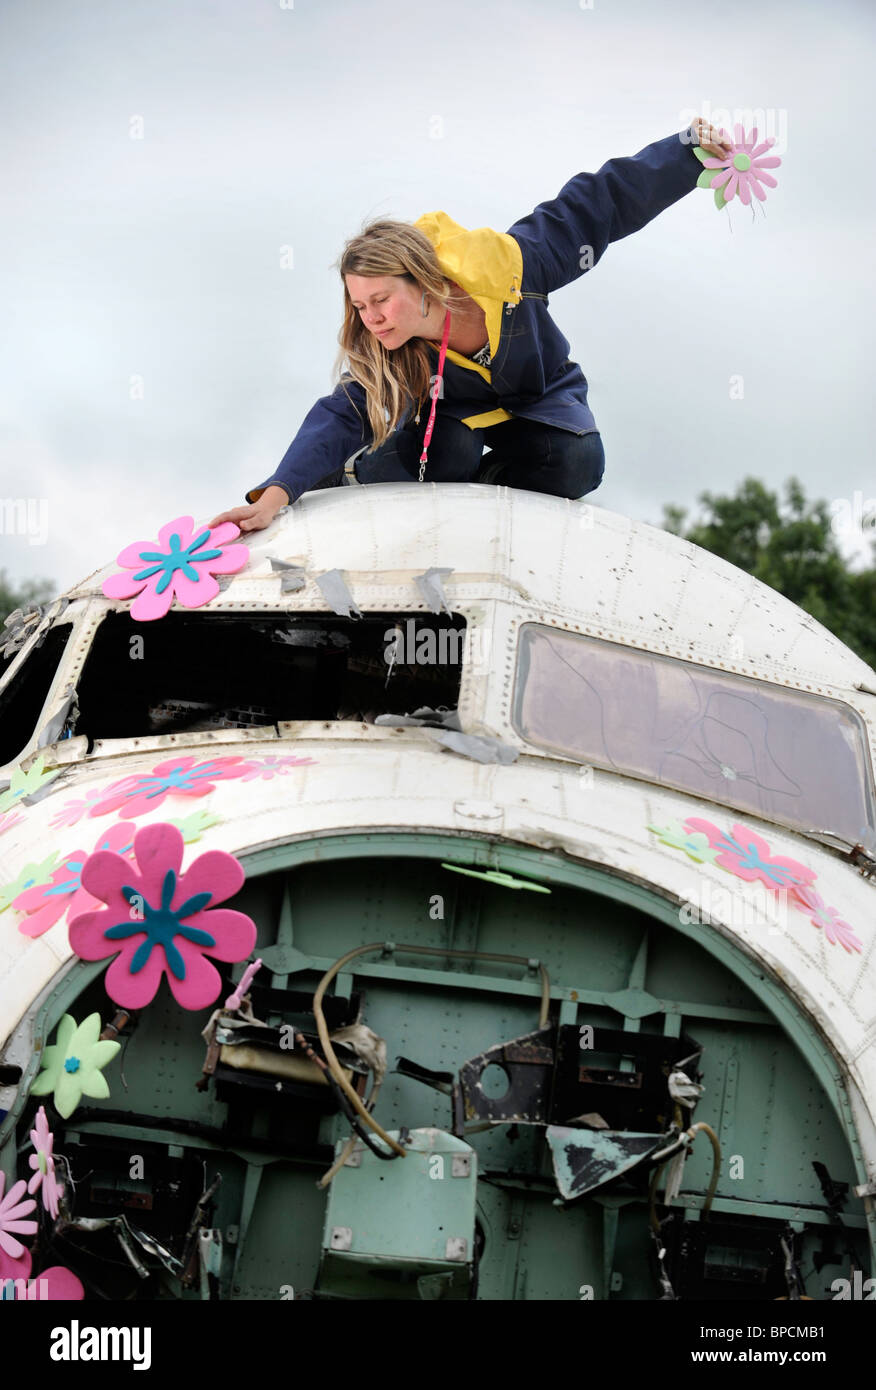 An artist decorates an old RAF plane with flowers in The Trash City area at the Glastonbury Festival site Pilton UK Stock Photo